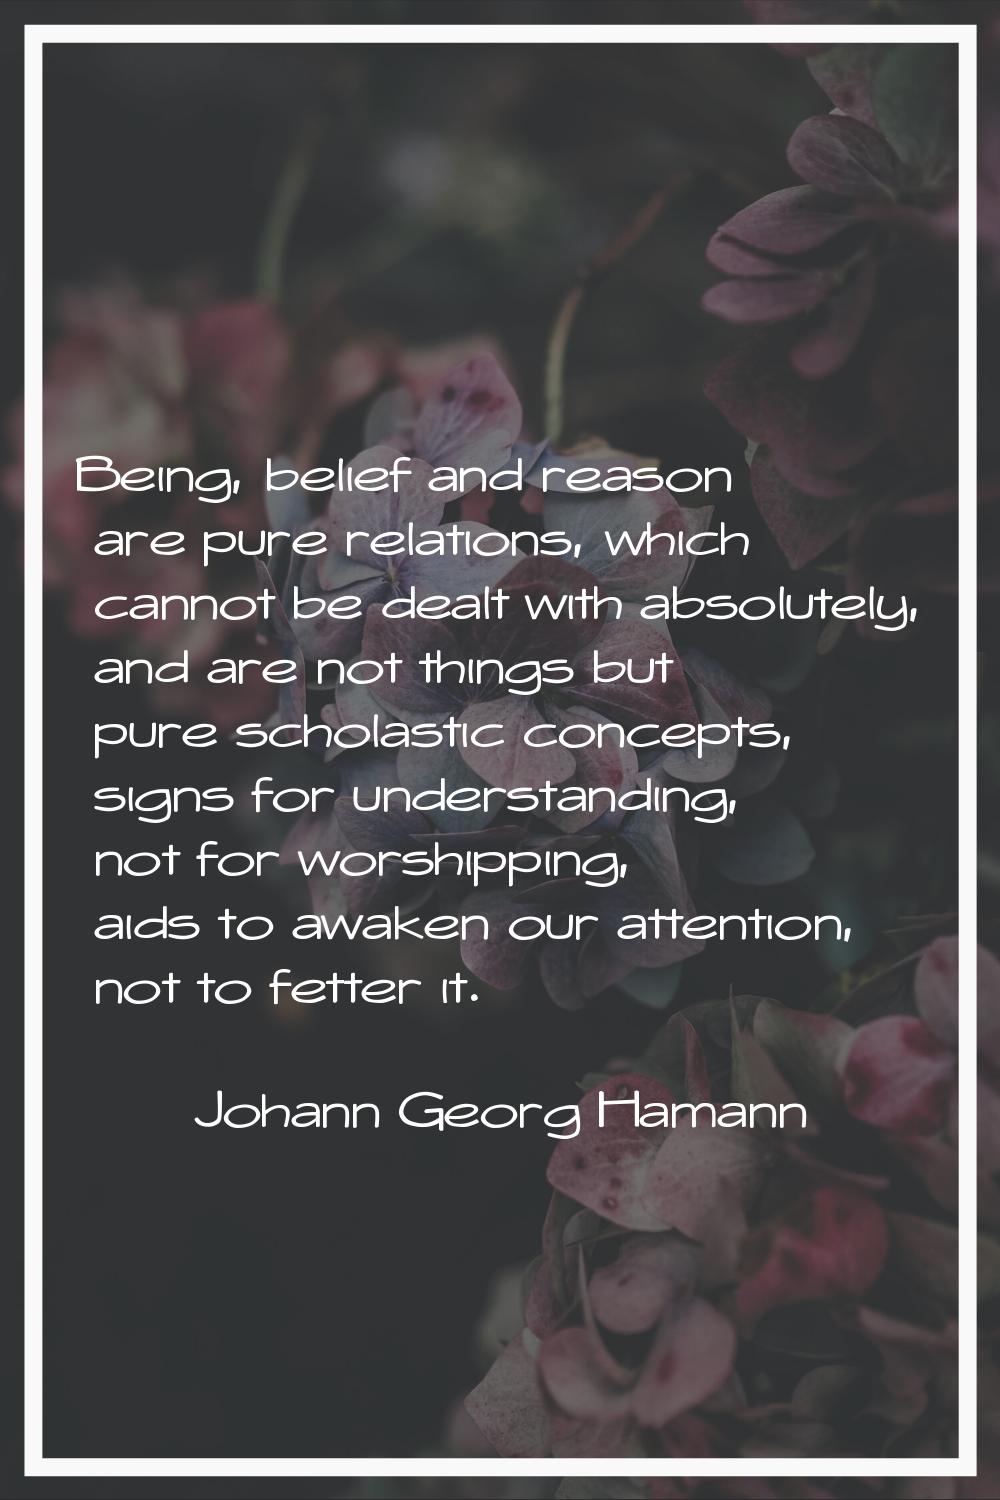 Being, belief and reason are pure relations, which cannot be dealt with absolutely, and are not thi